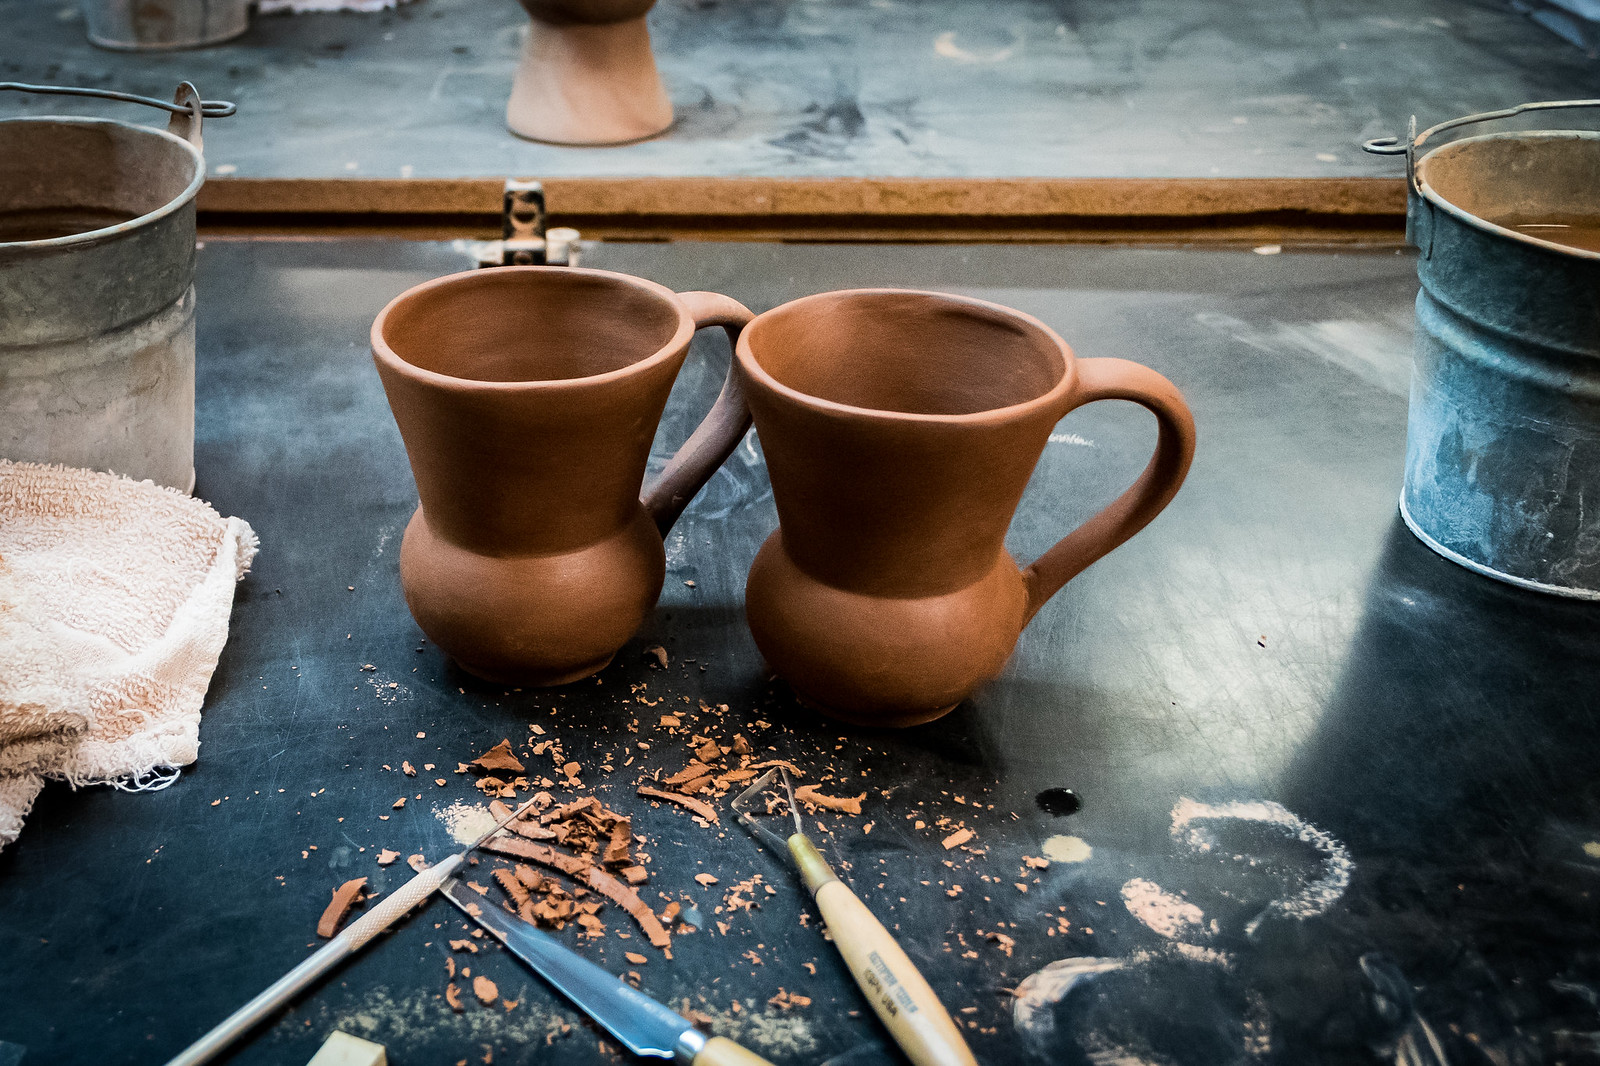 We smoothed and shaped these mugs ourselves! So fun!